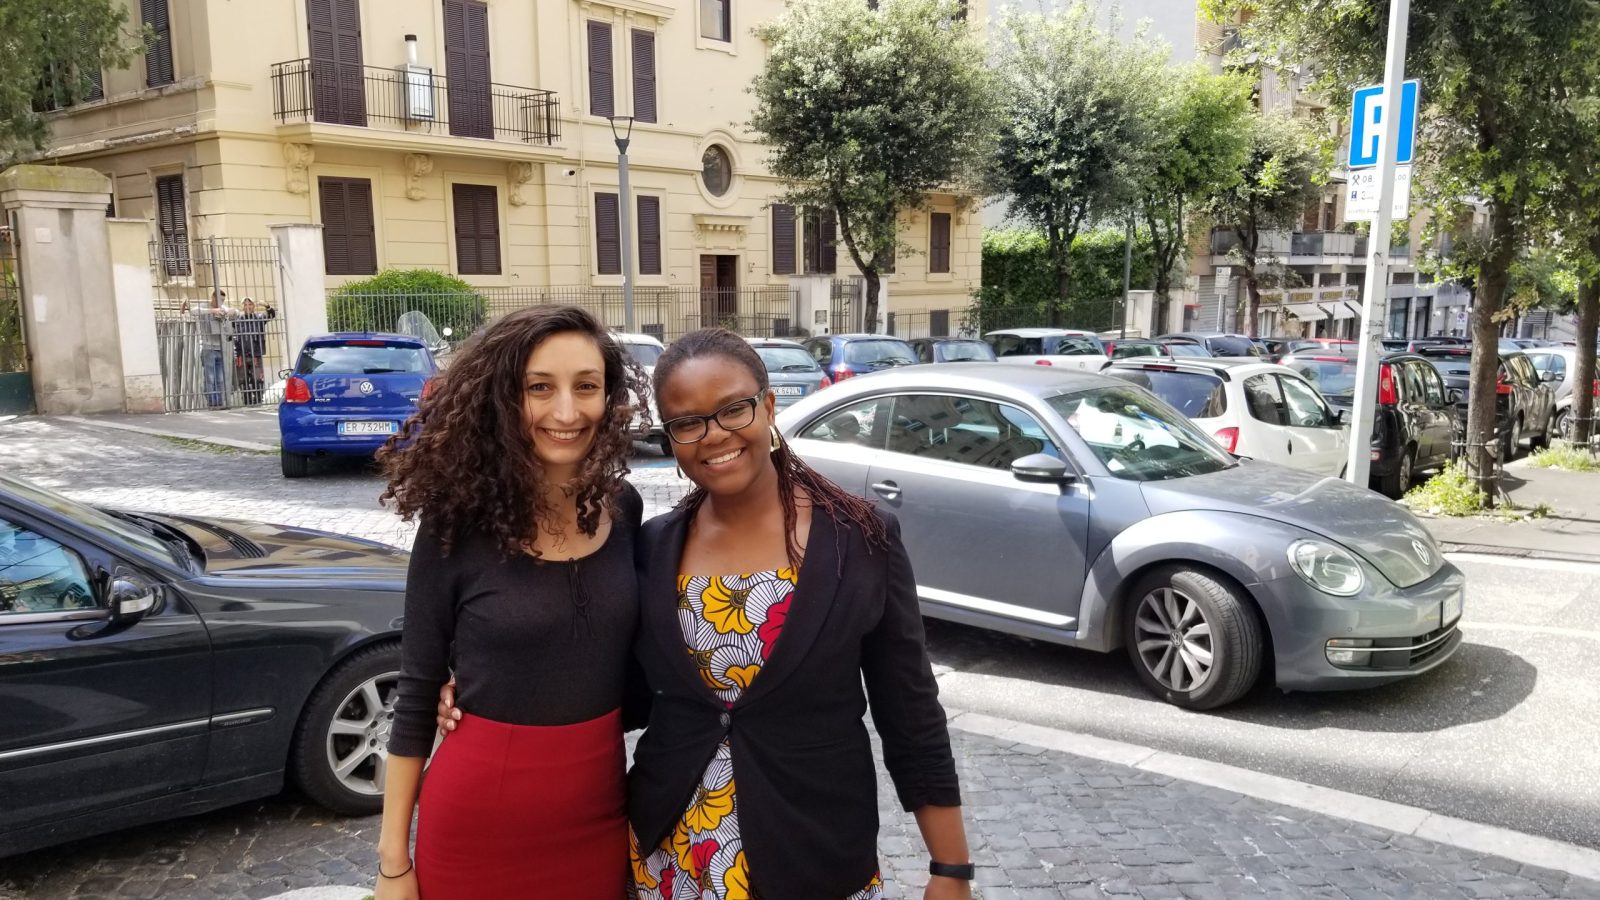 Foluyinka and her GHD capstone partner standing on a street in Rome